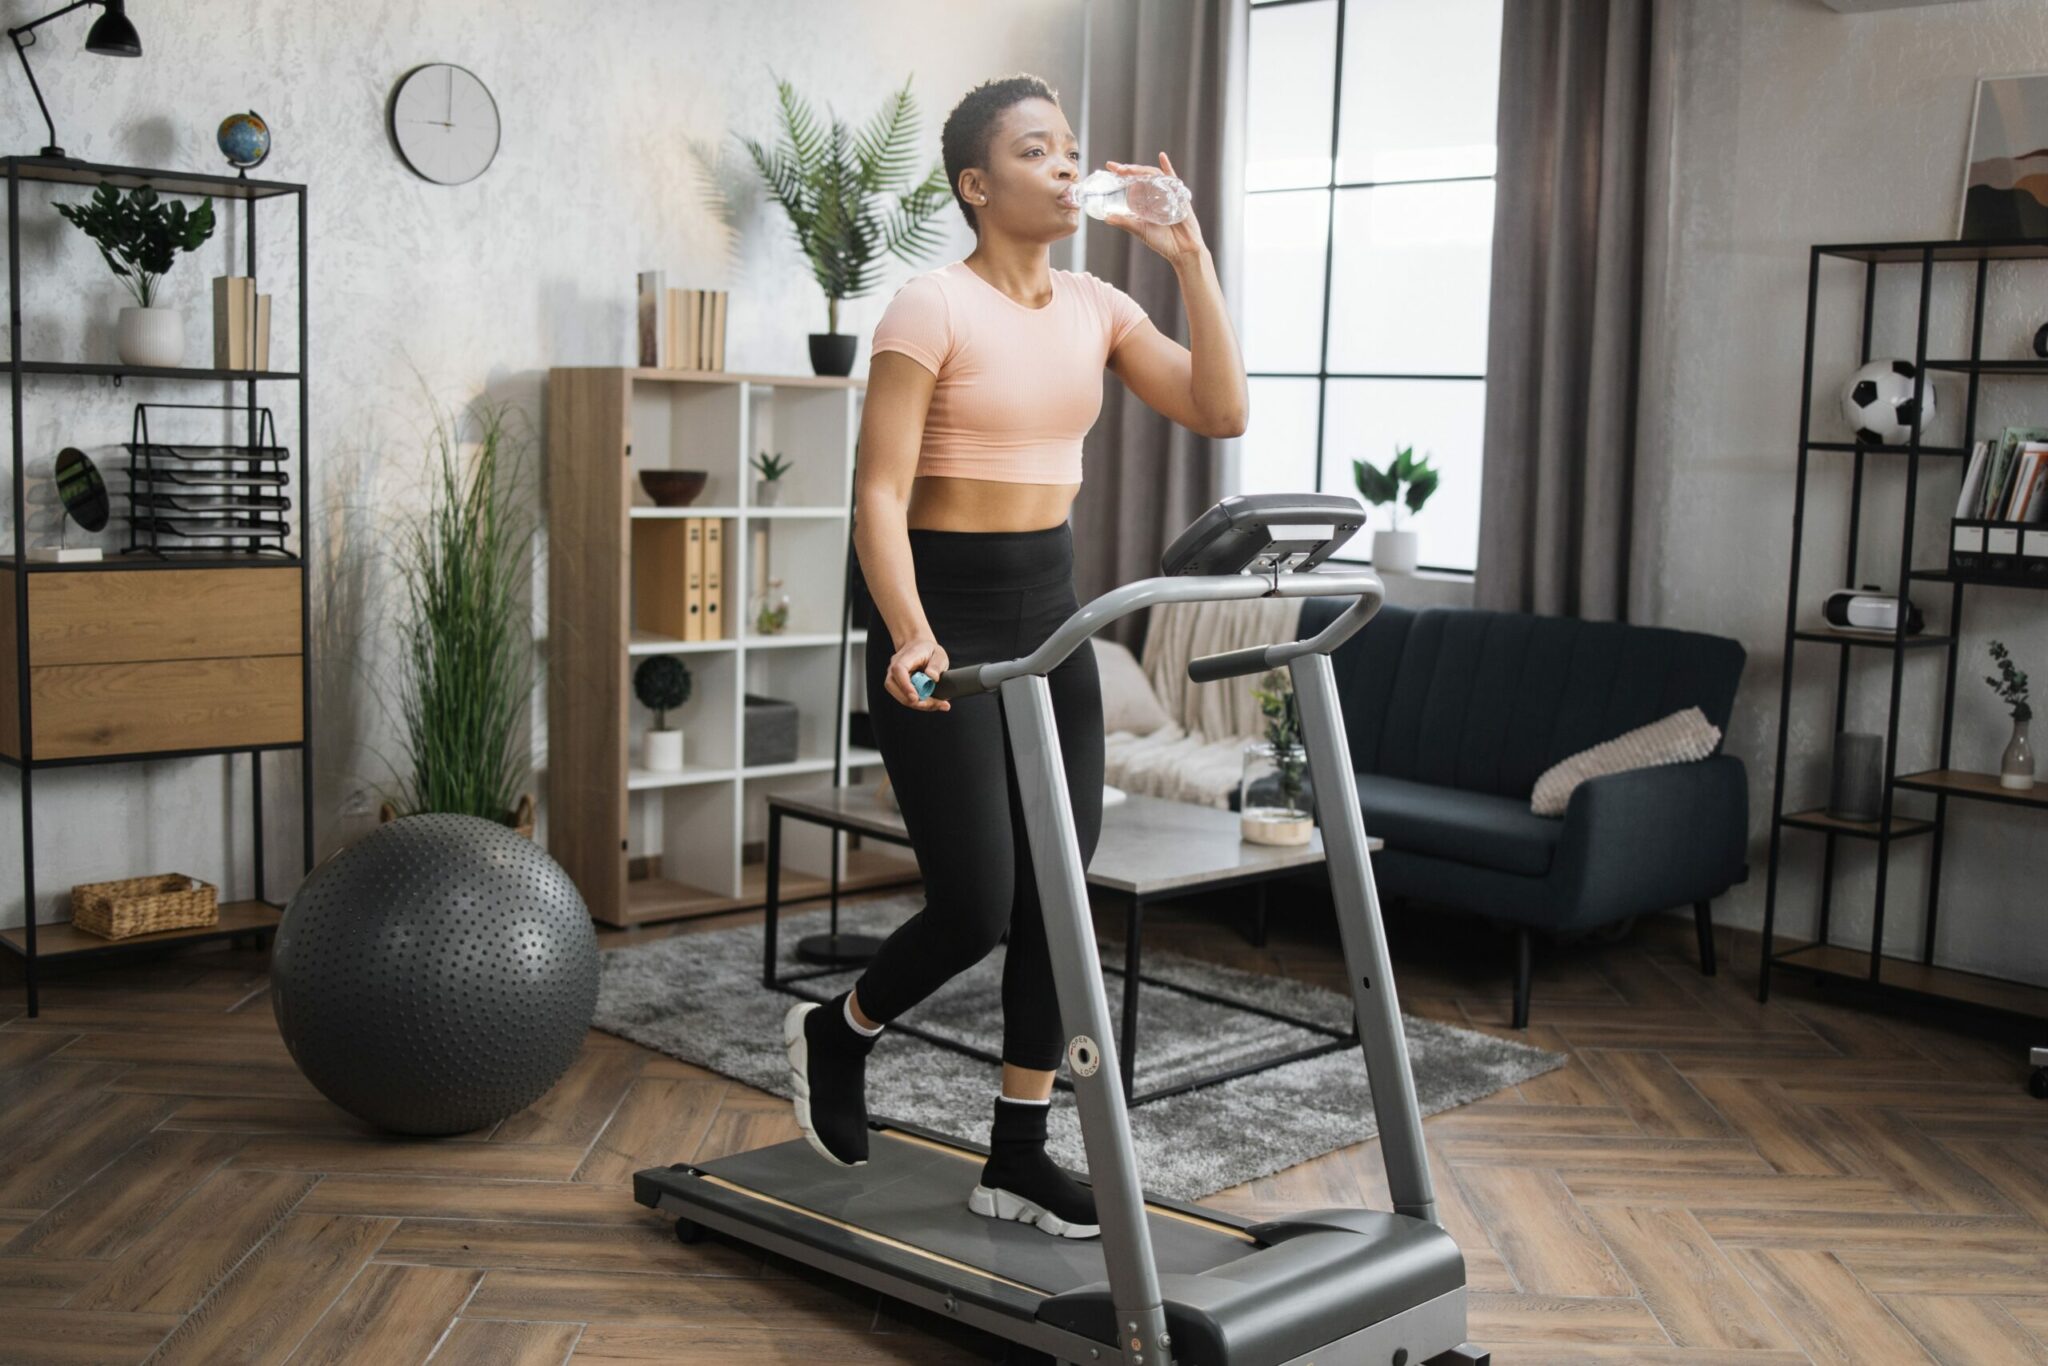 A person working out on a treadmill at home.